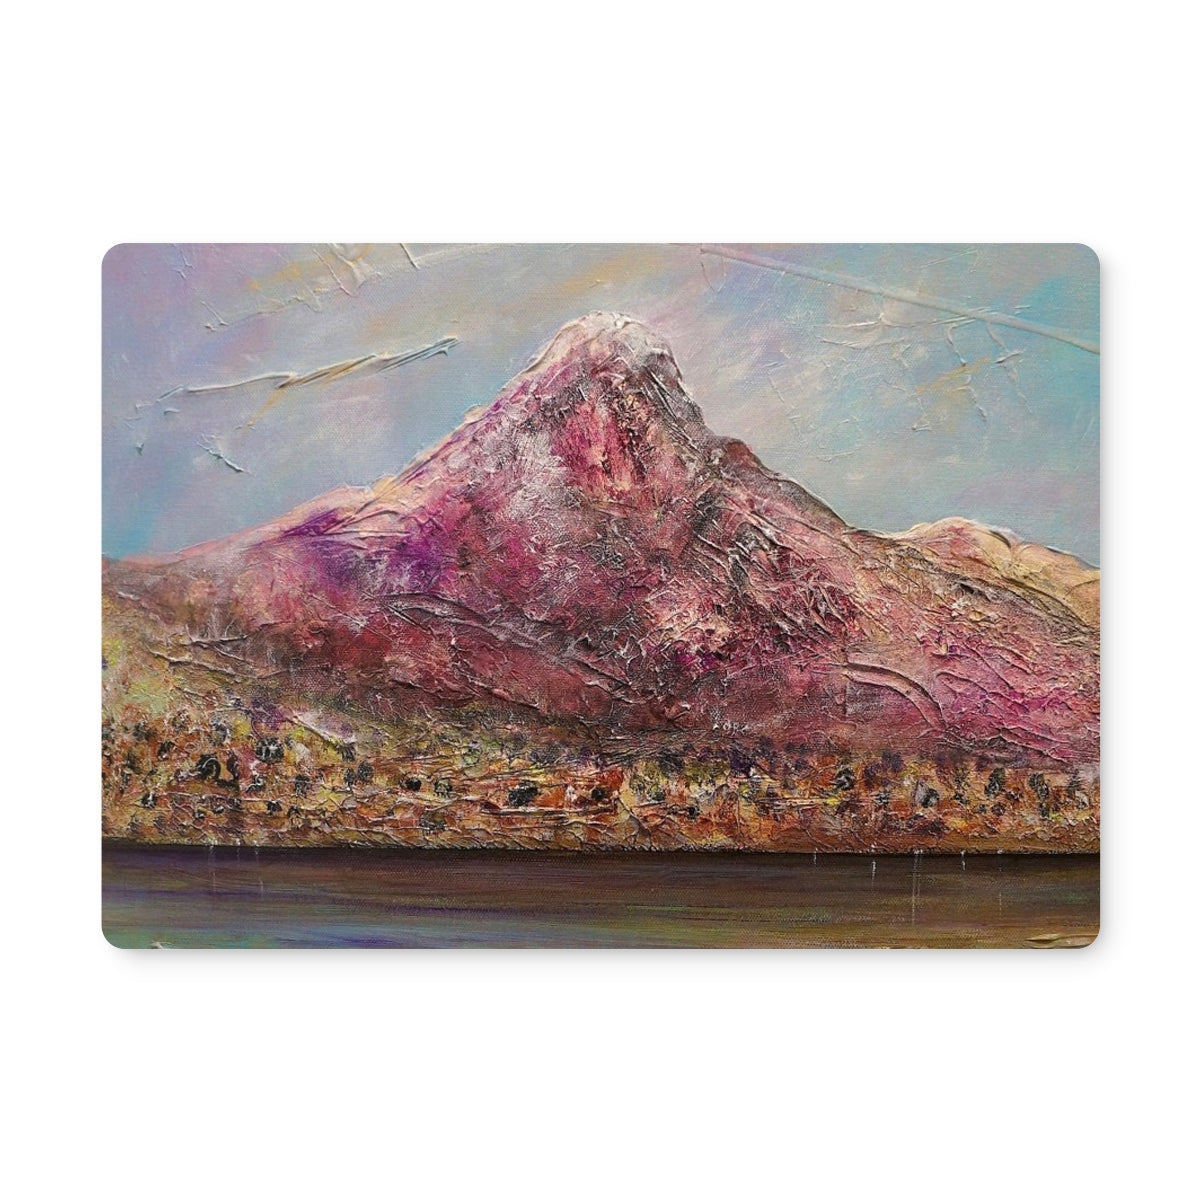 Ben Lomond Art Gifts Placemat-Placemats-Scottish Lochs & Mountains Art Gallery-Single Placemat-Paintings, Prints, Homeware, Art Gifts From Scotland By Scottish Artist Kevin Hunter